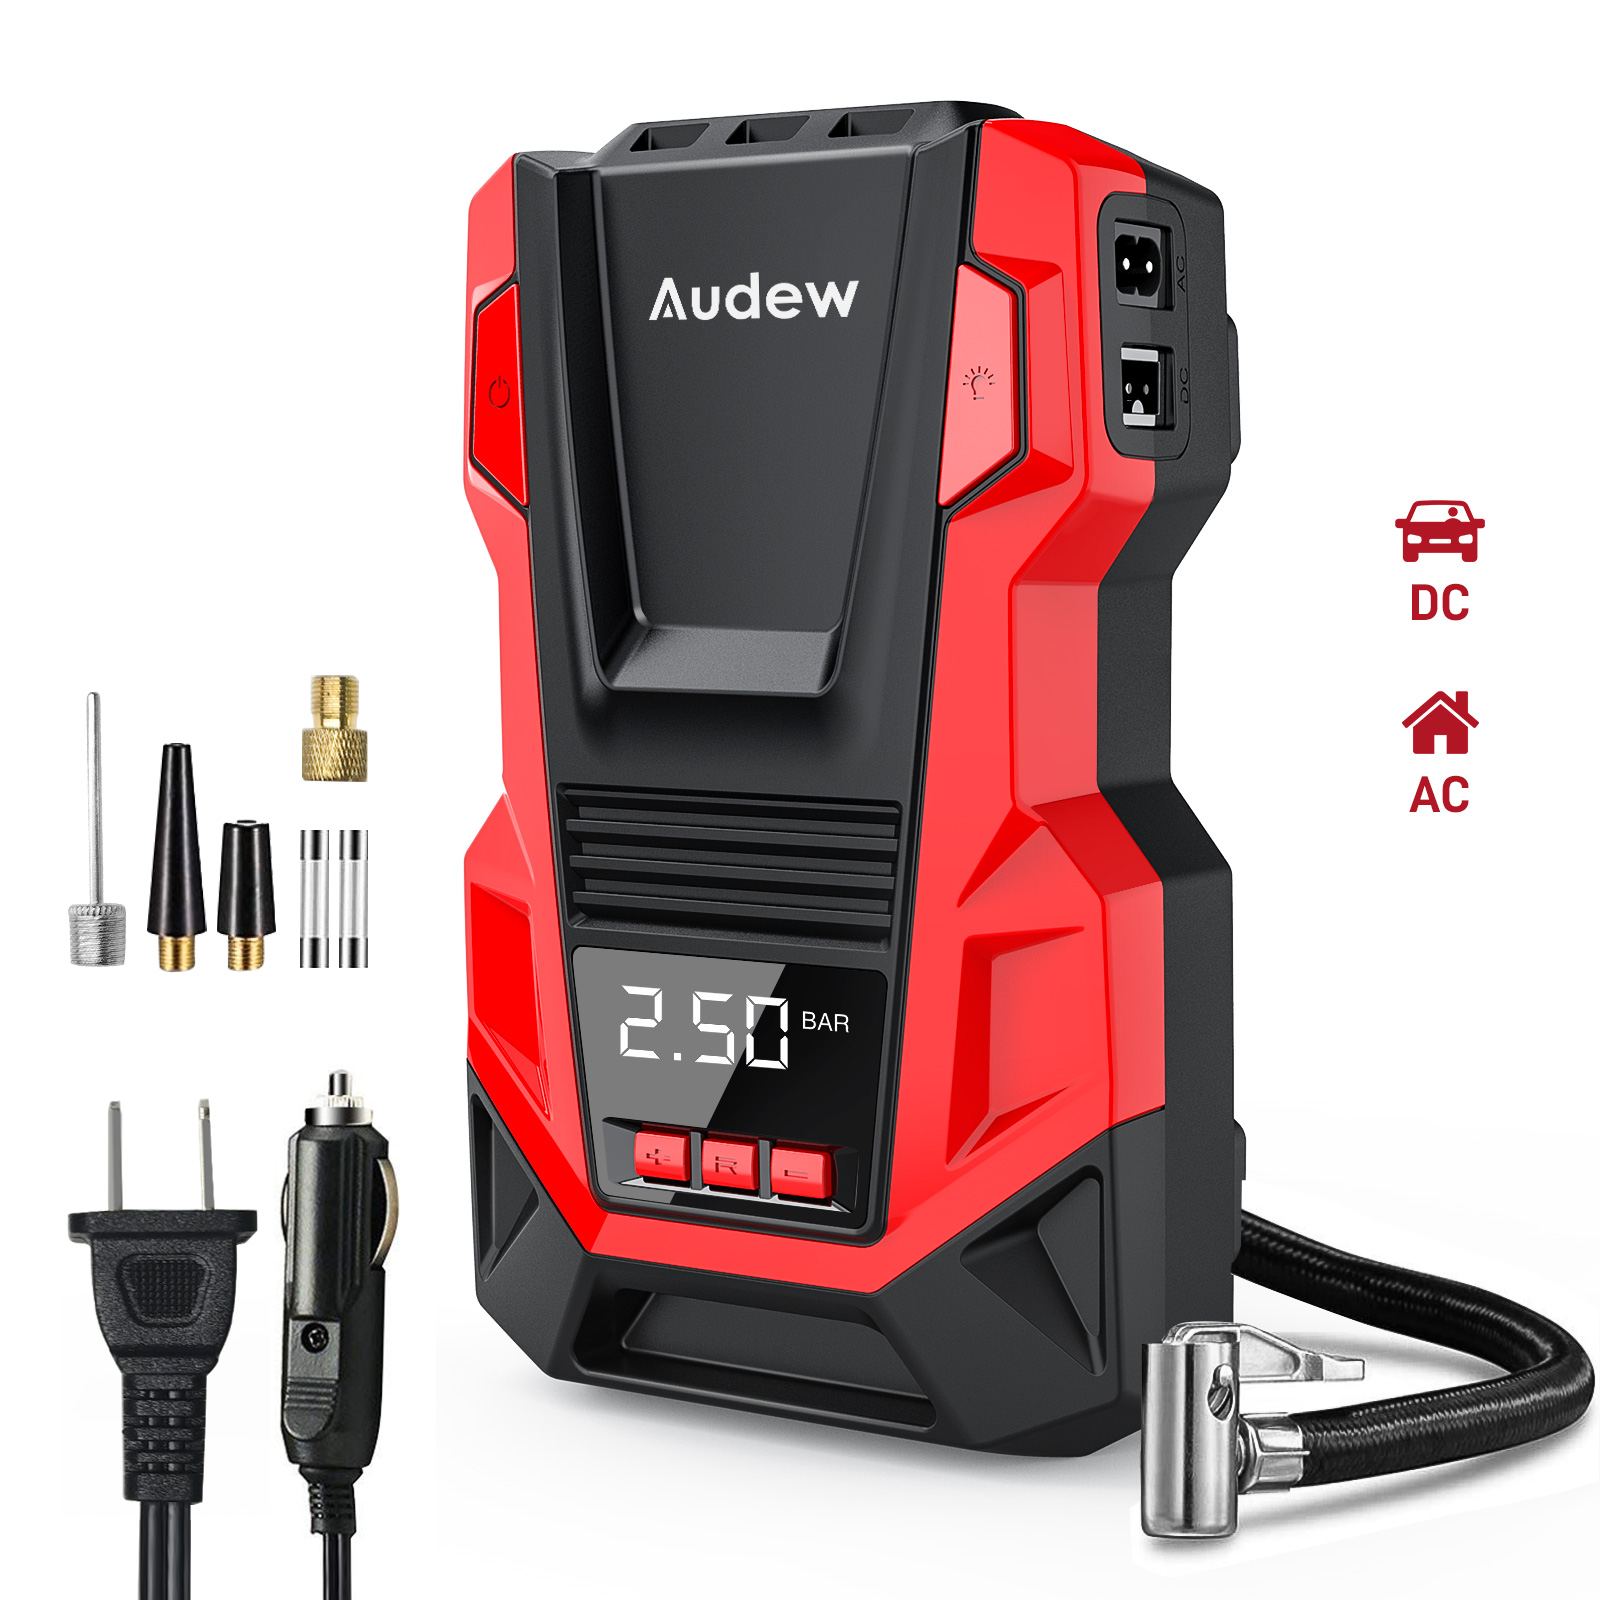 Audew-ACDC-Portable-Digital-Air-Pump-Tire-Inflator-Air-Compressor-with-Automatic-Display-For-Car-Bic-1835433-5